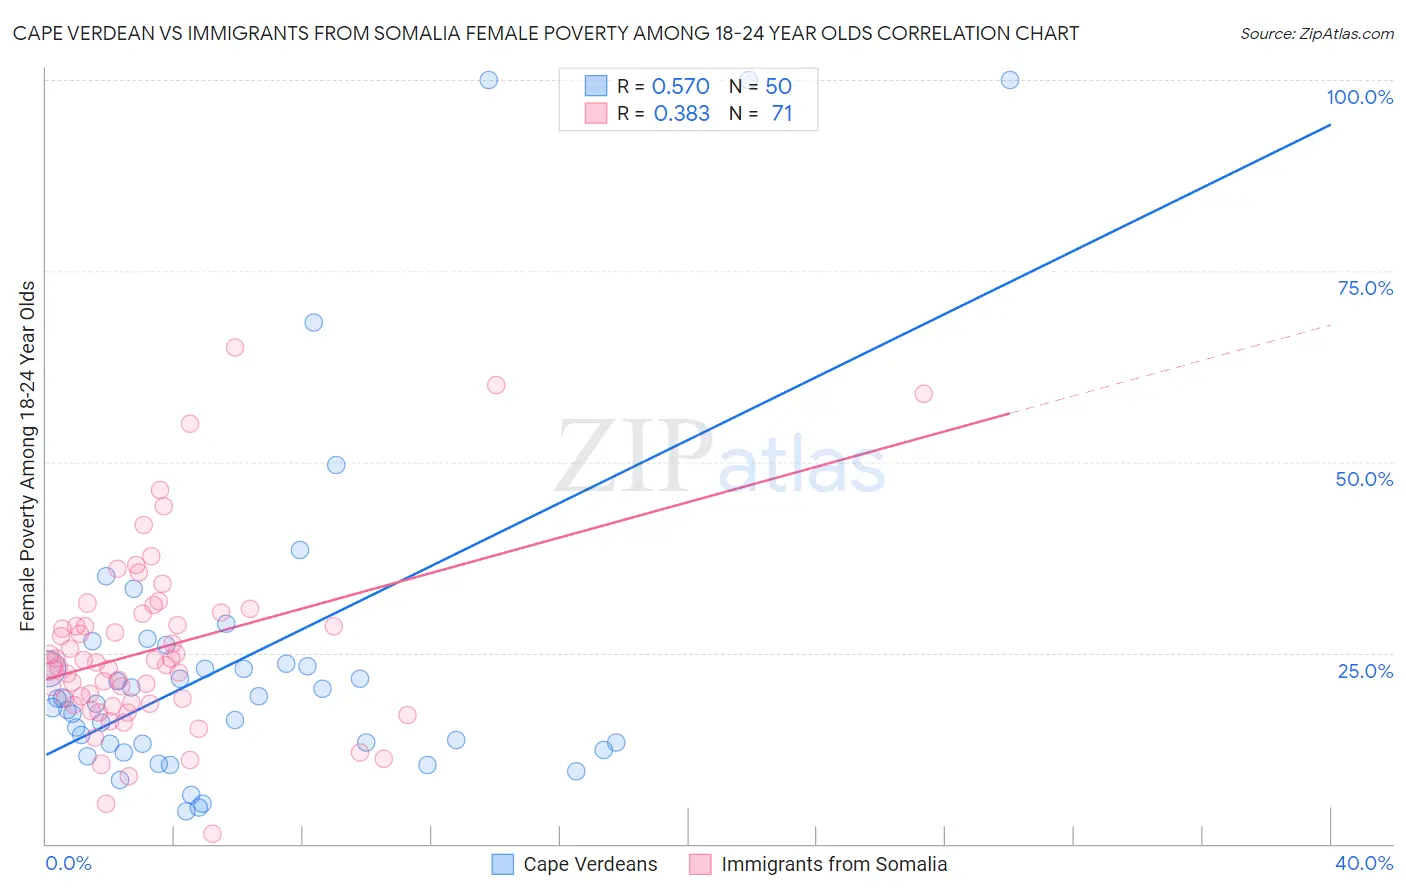 Cape Verdean vs Immigrants from Somalia Female Poverty Among 18-24 Year Olds